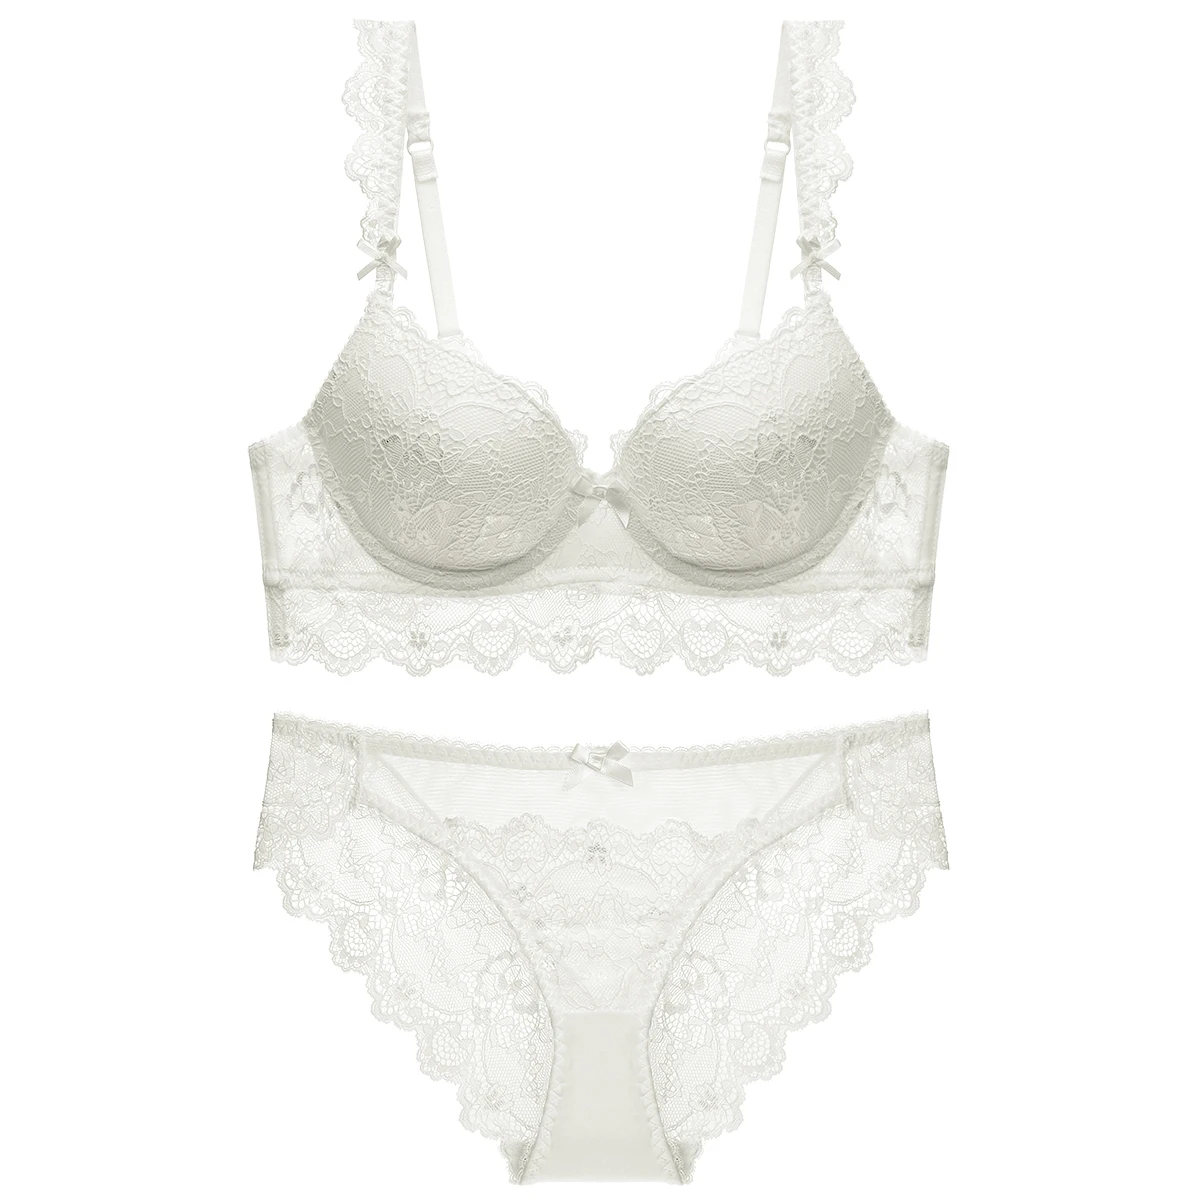 KLV Sexy Lingerie White Lace Bra Set Fashion Sexy Underwear Women Ultra  Thin Transparent Bra And Panty Set Intimates Sets From Mj_covenant, $26.52